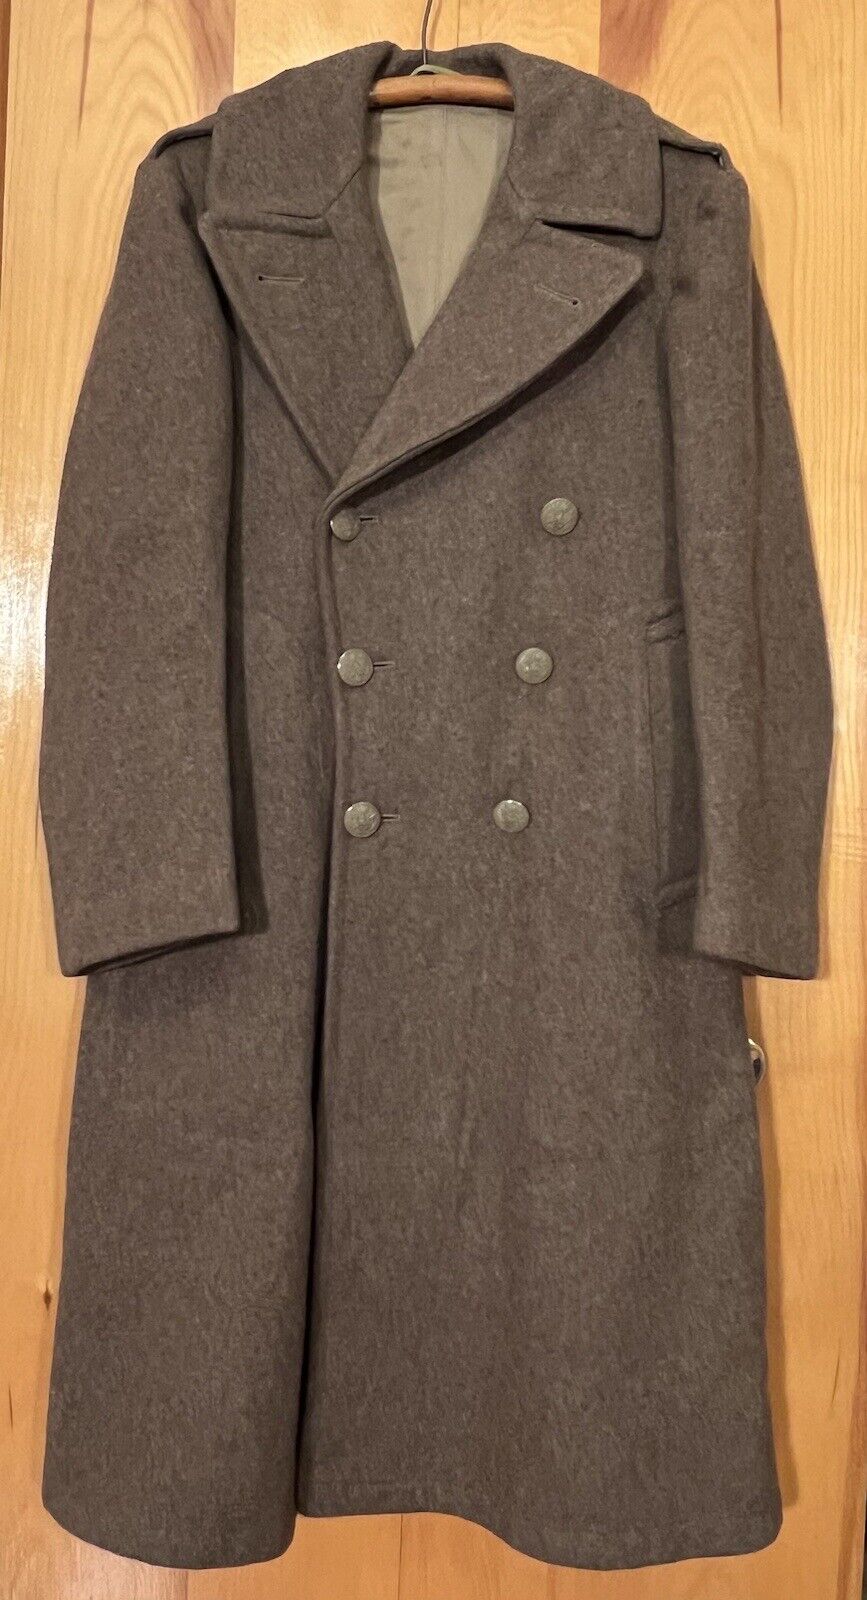 Vintage WW2 US Army Military Melton Wool Overcoat Trench Coat Size 36 S